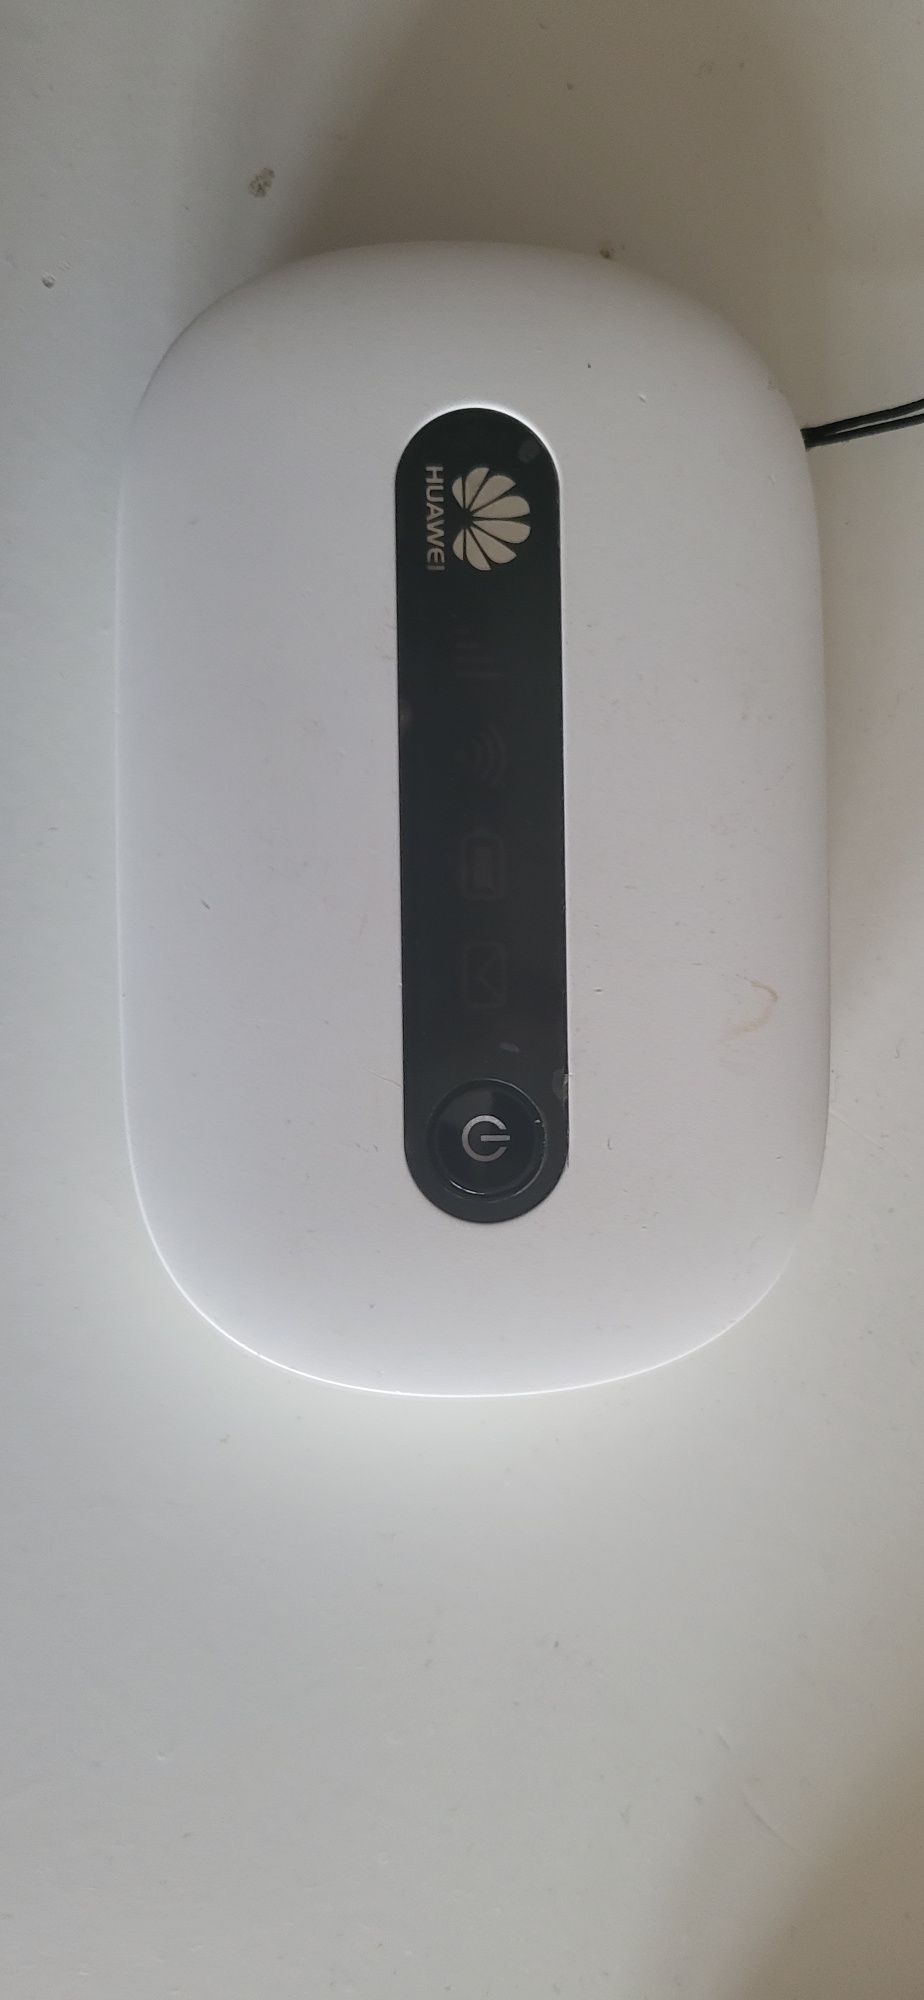 Huawei Hb6a2h           router